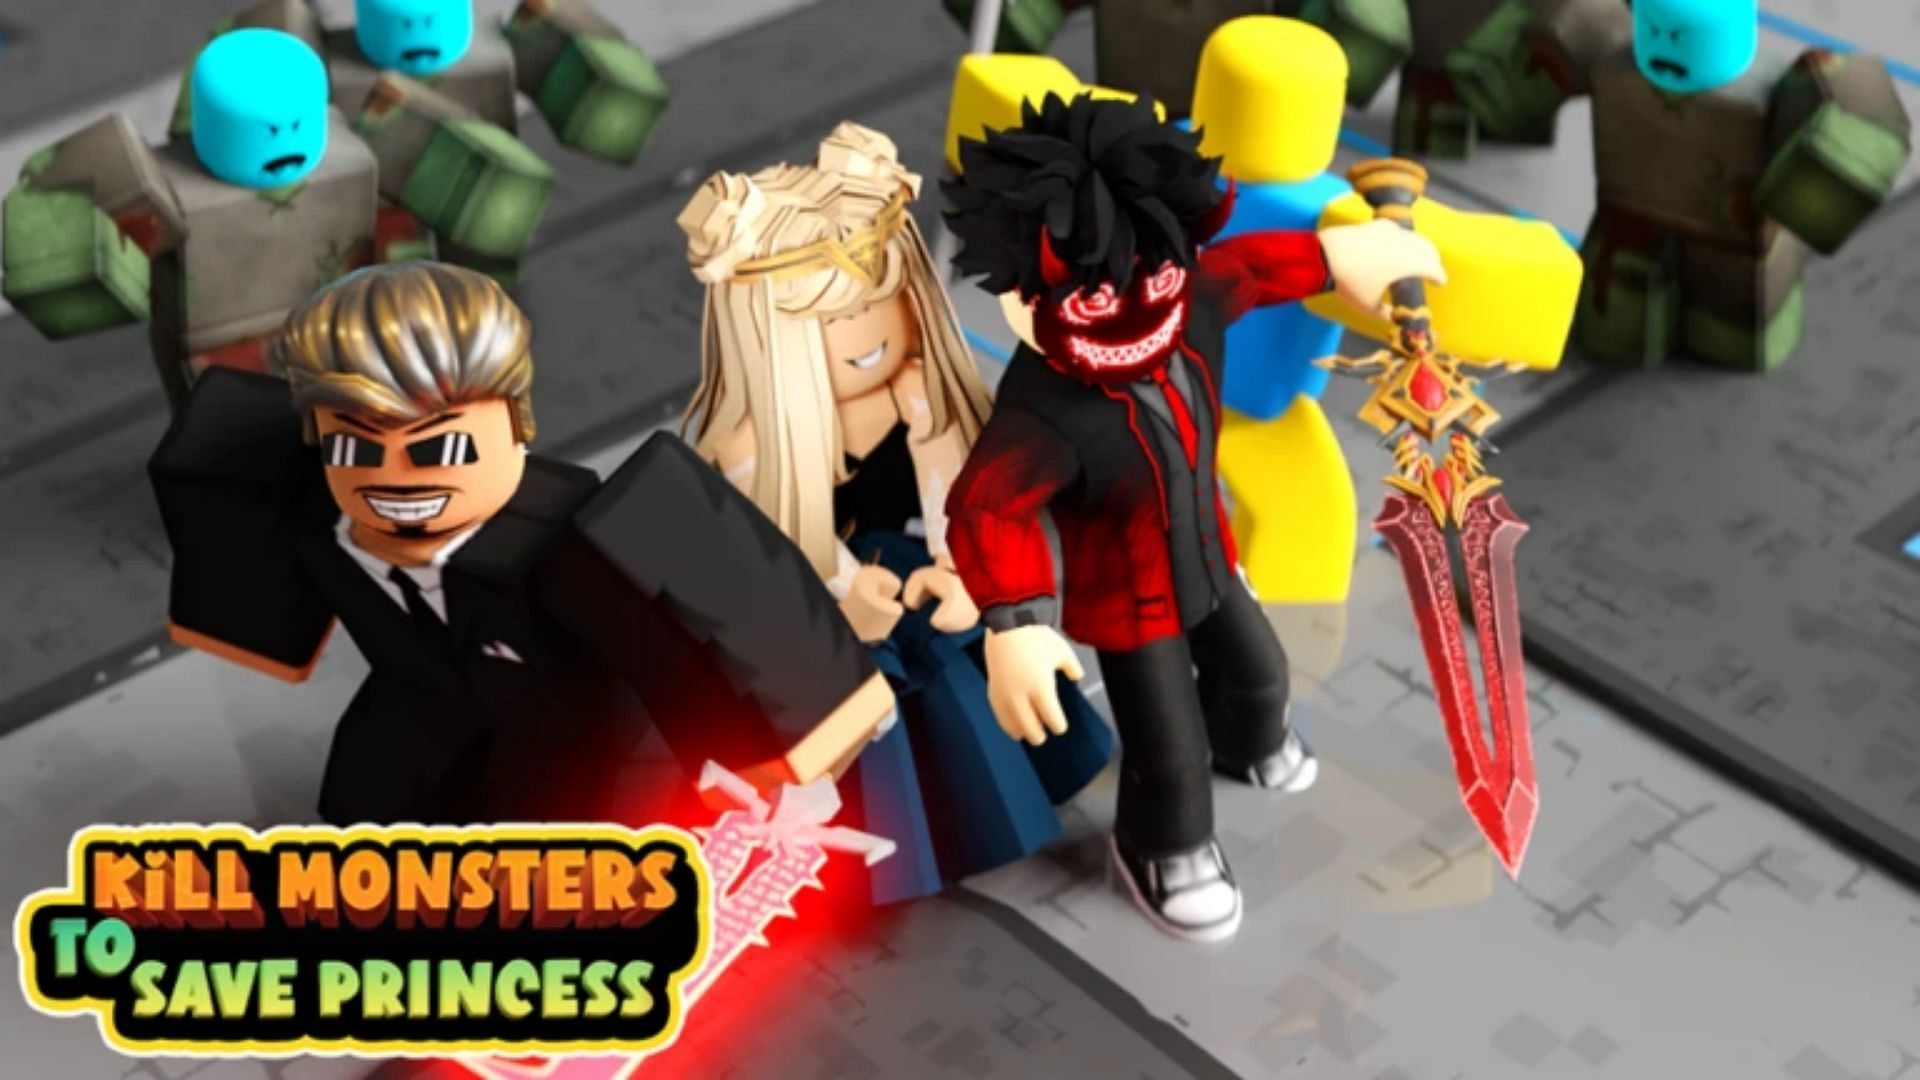 Codes for Kill Monsters to Save Princess and their importance (Image via Roblox)